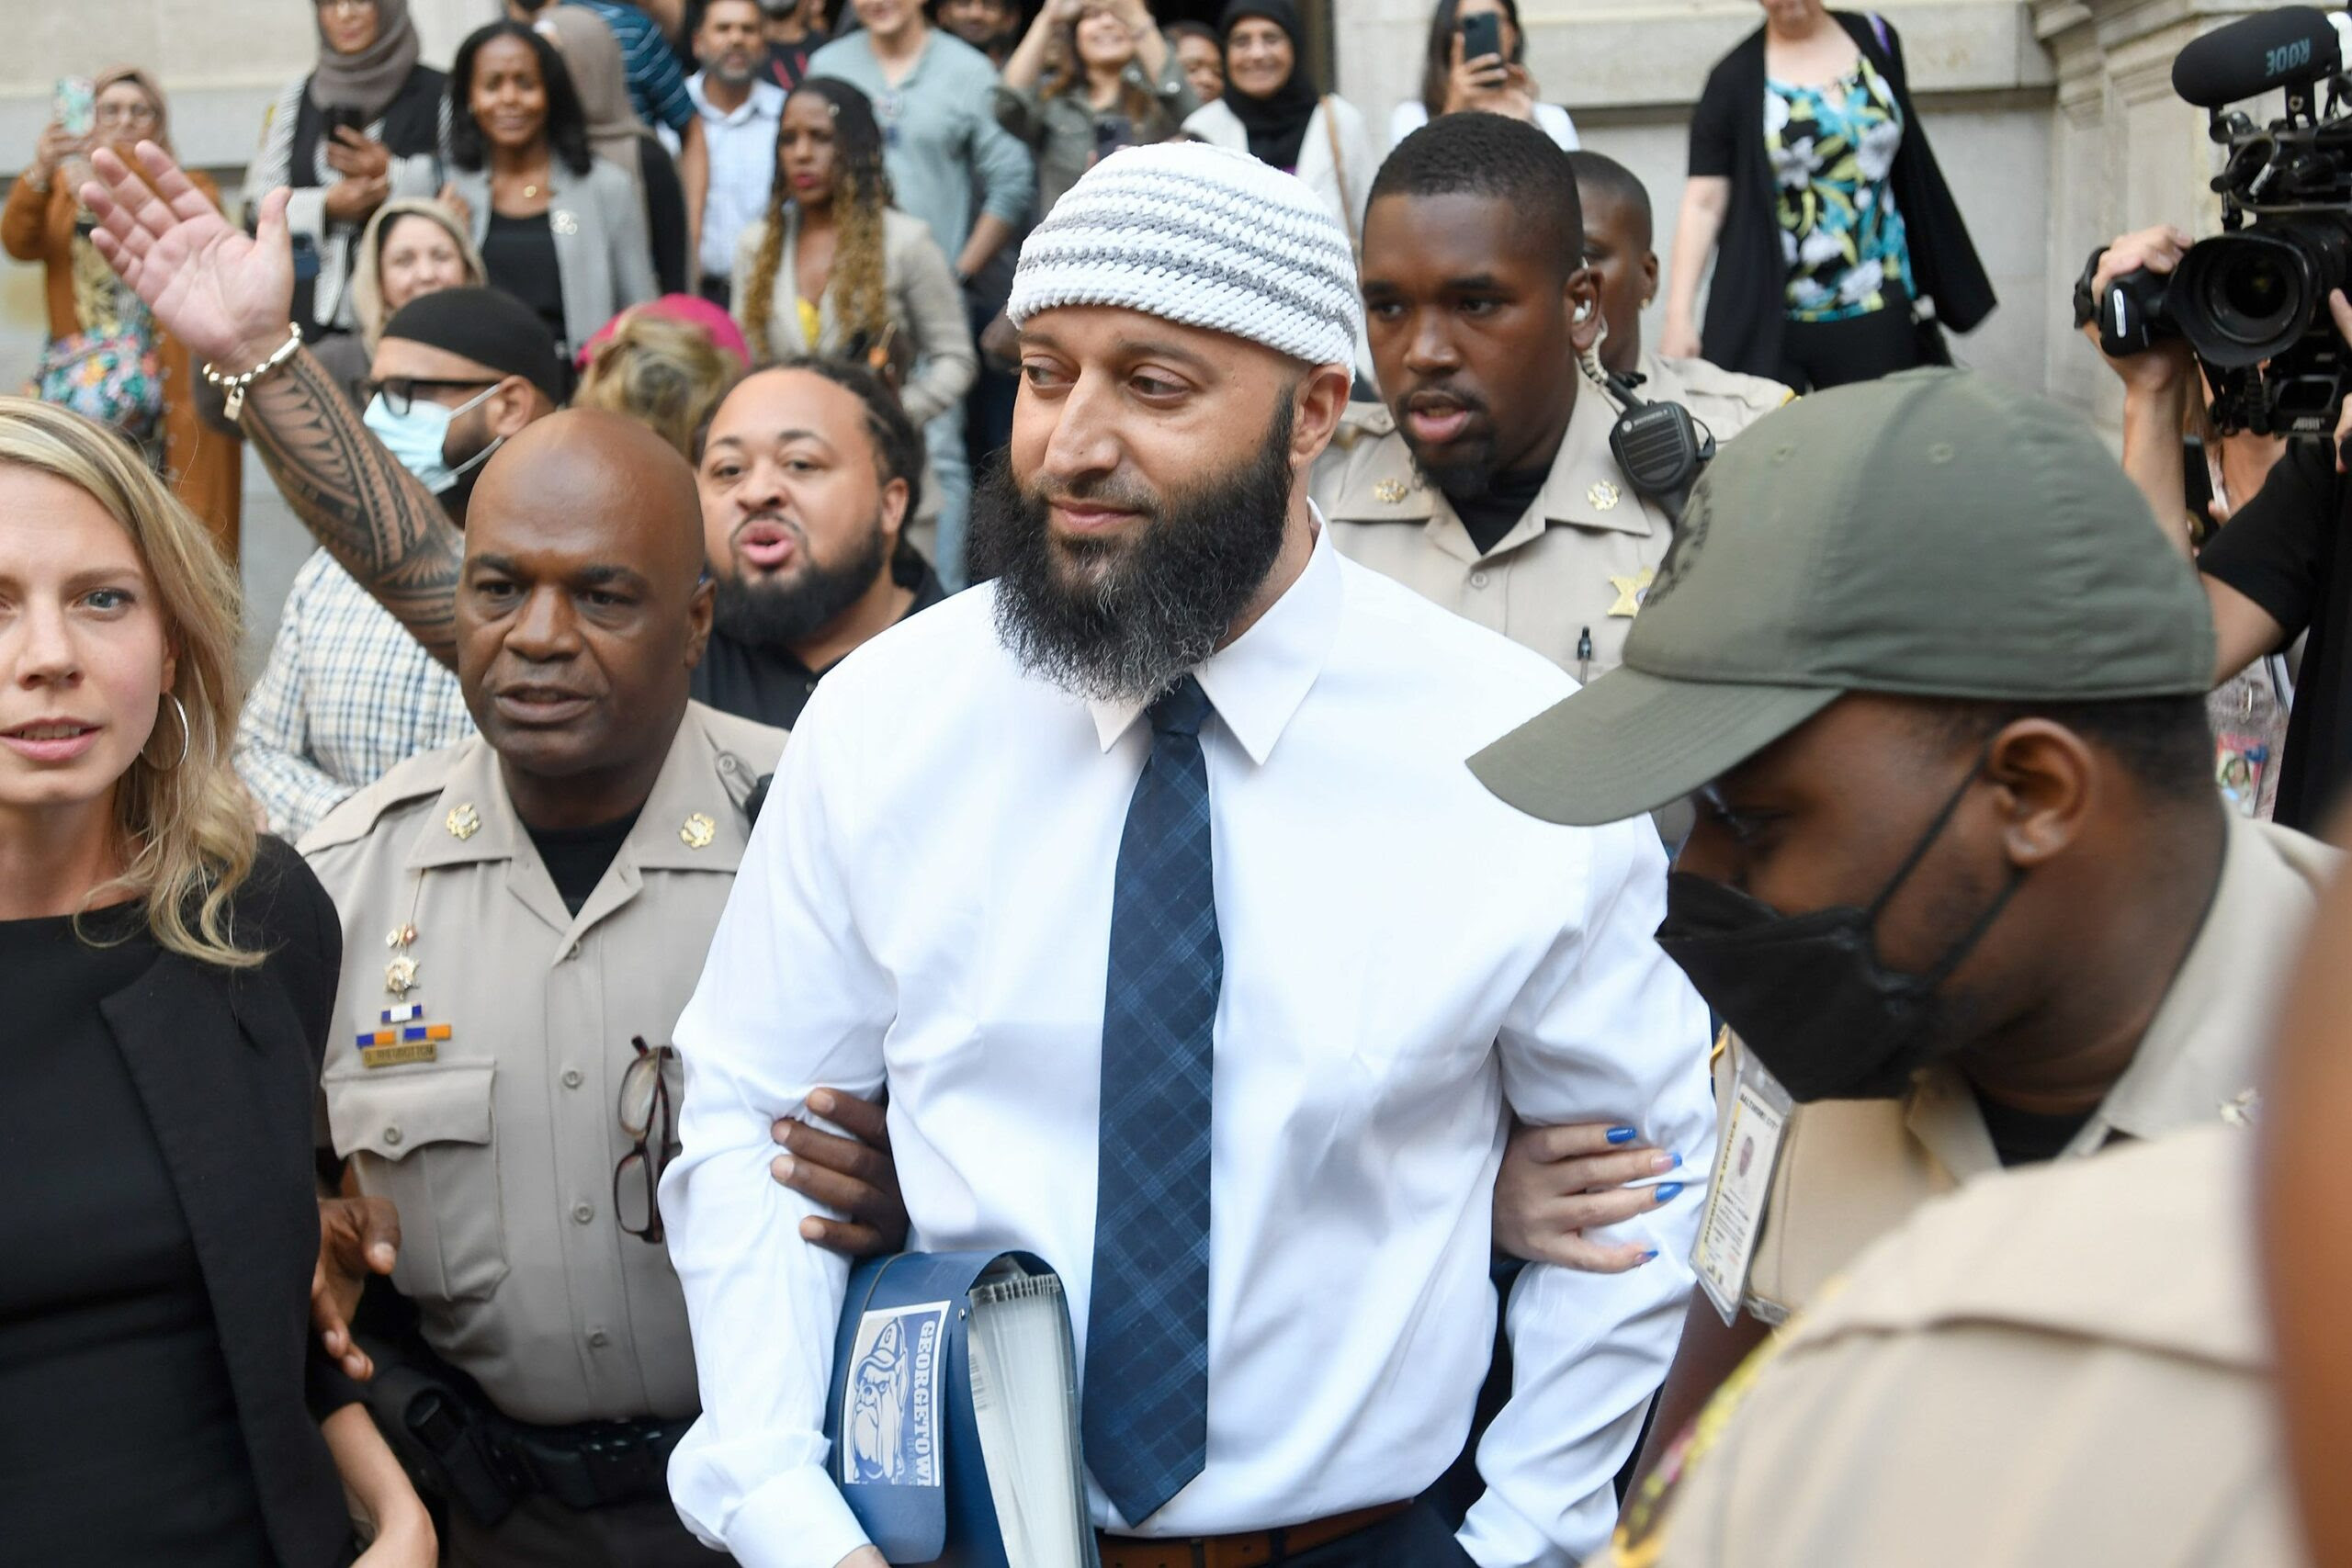 Adnan Syed, center, whose case gained notoriety from the hit podcast “Serial,” leaves a courthouse after a judge vacated his 2000 murder conviction Monday, Sept. 19, 2022 in Baltimore. (Image: Steve Ruark/AP Images for The Innocence Project)